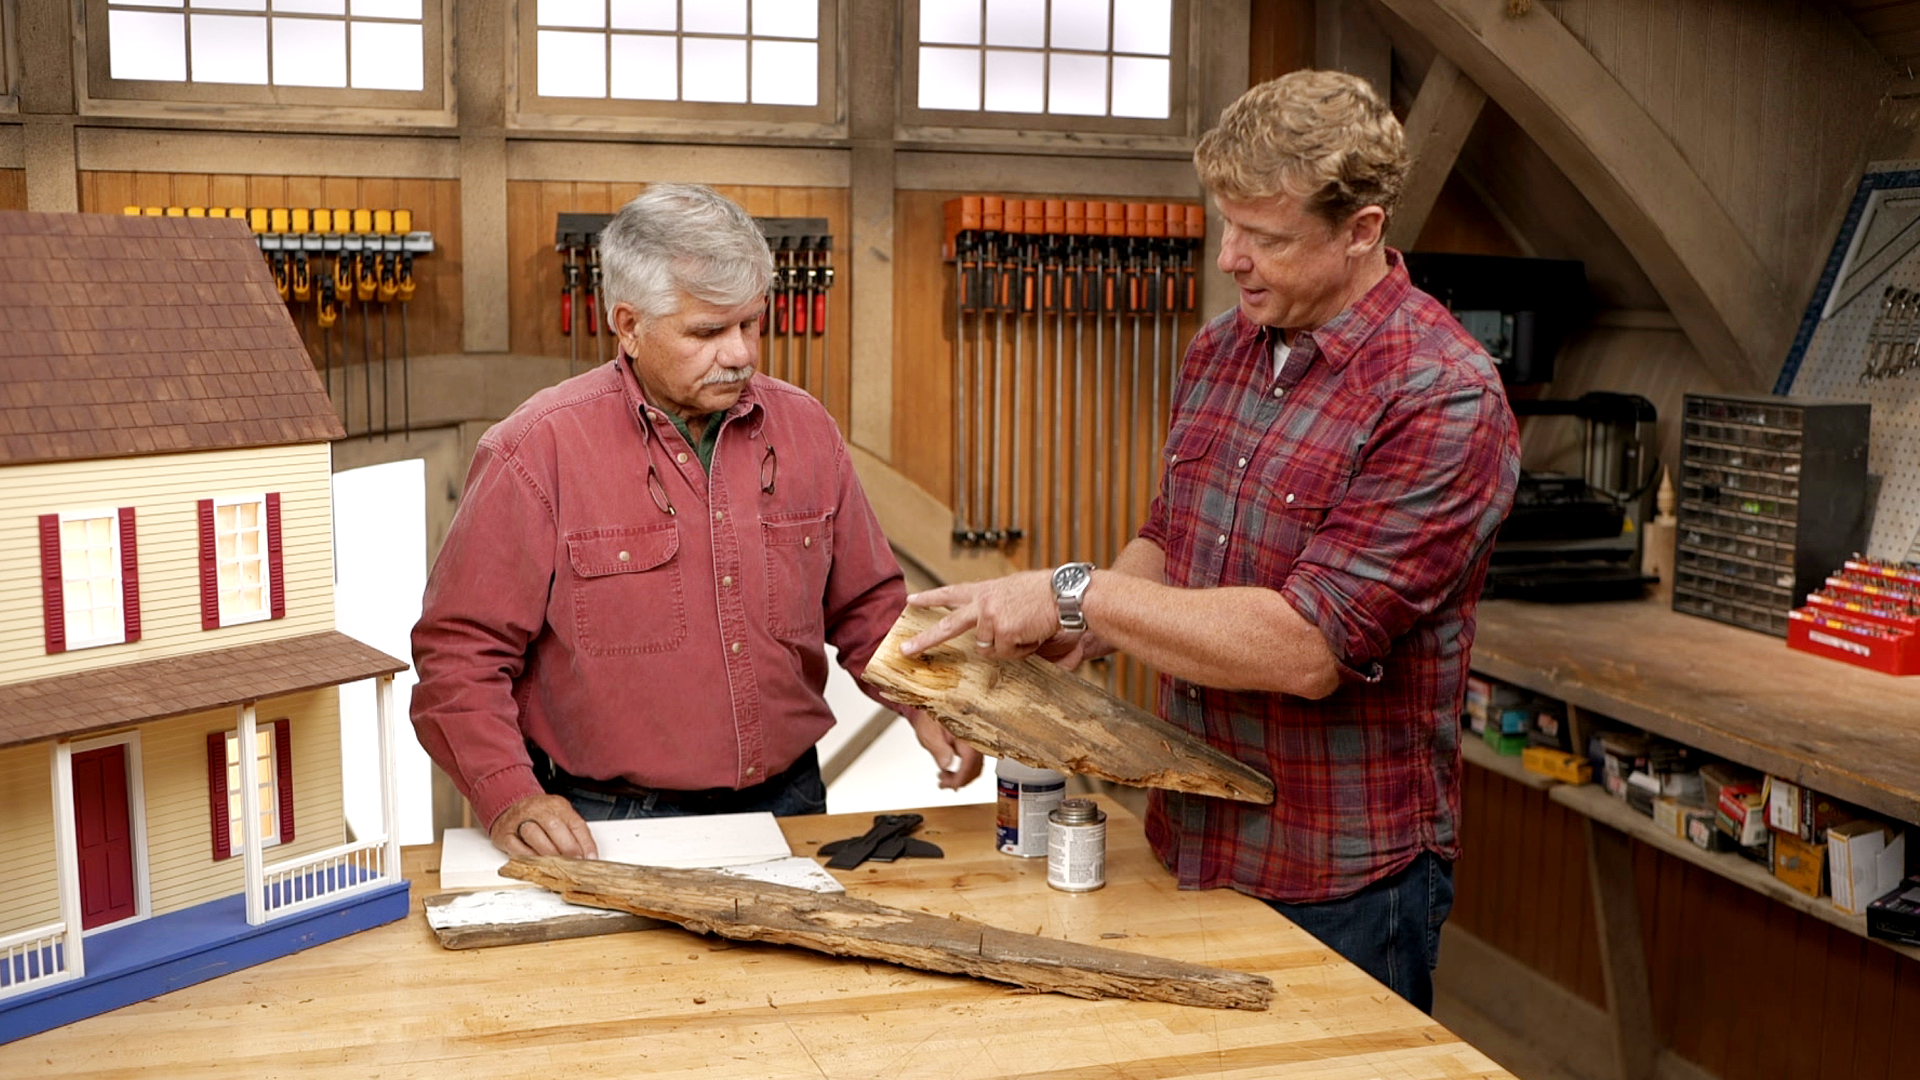 S20 E13, Tom Silva explains how to identify wood rot to Kevin O’Connor